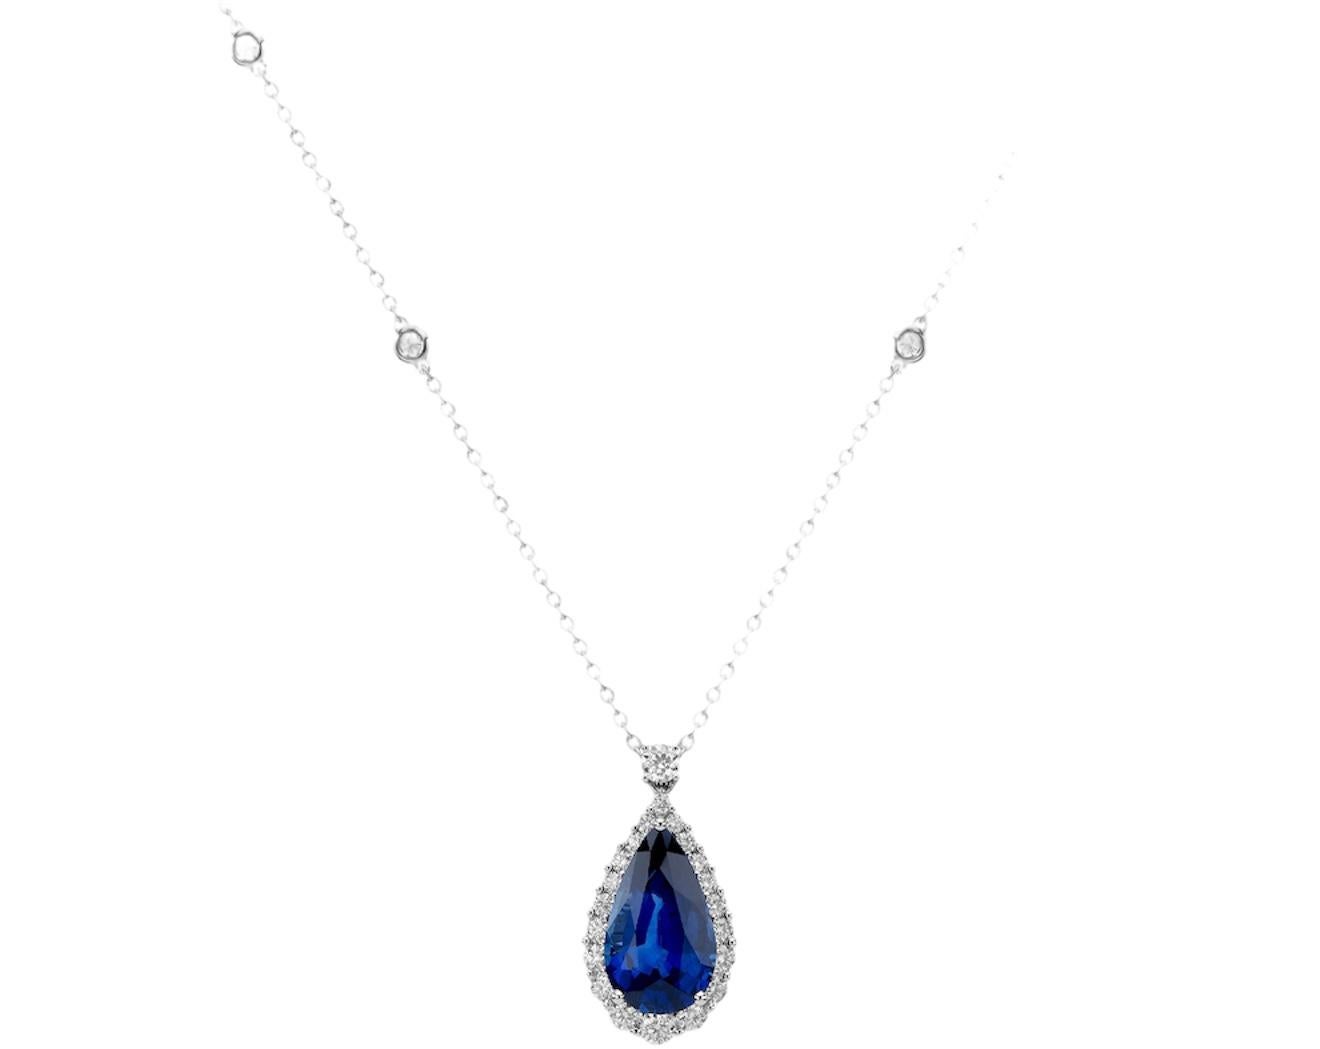 Pear Cut GIA certified 11.75 Carat Pear shape Sapphire and Diamond pendant For Sale